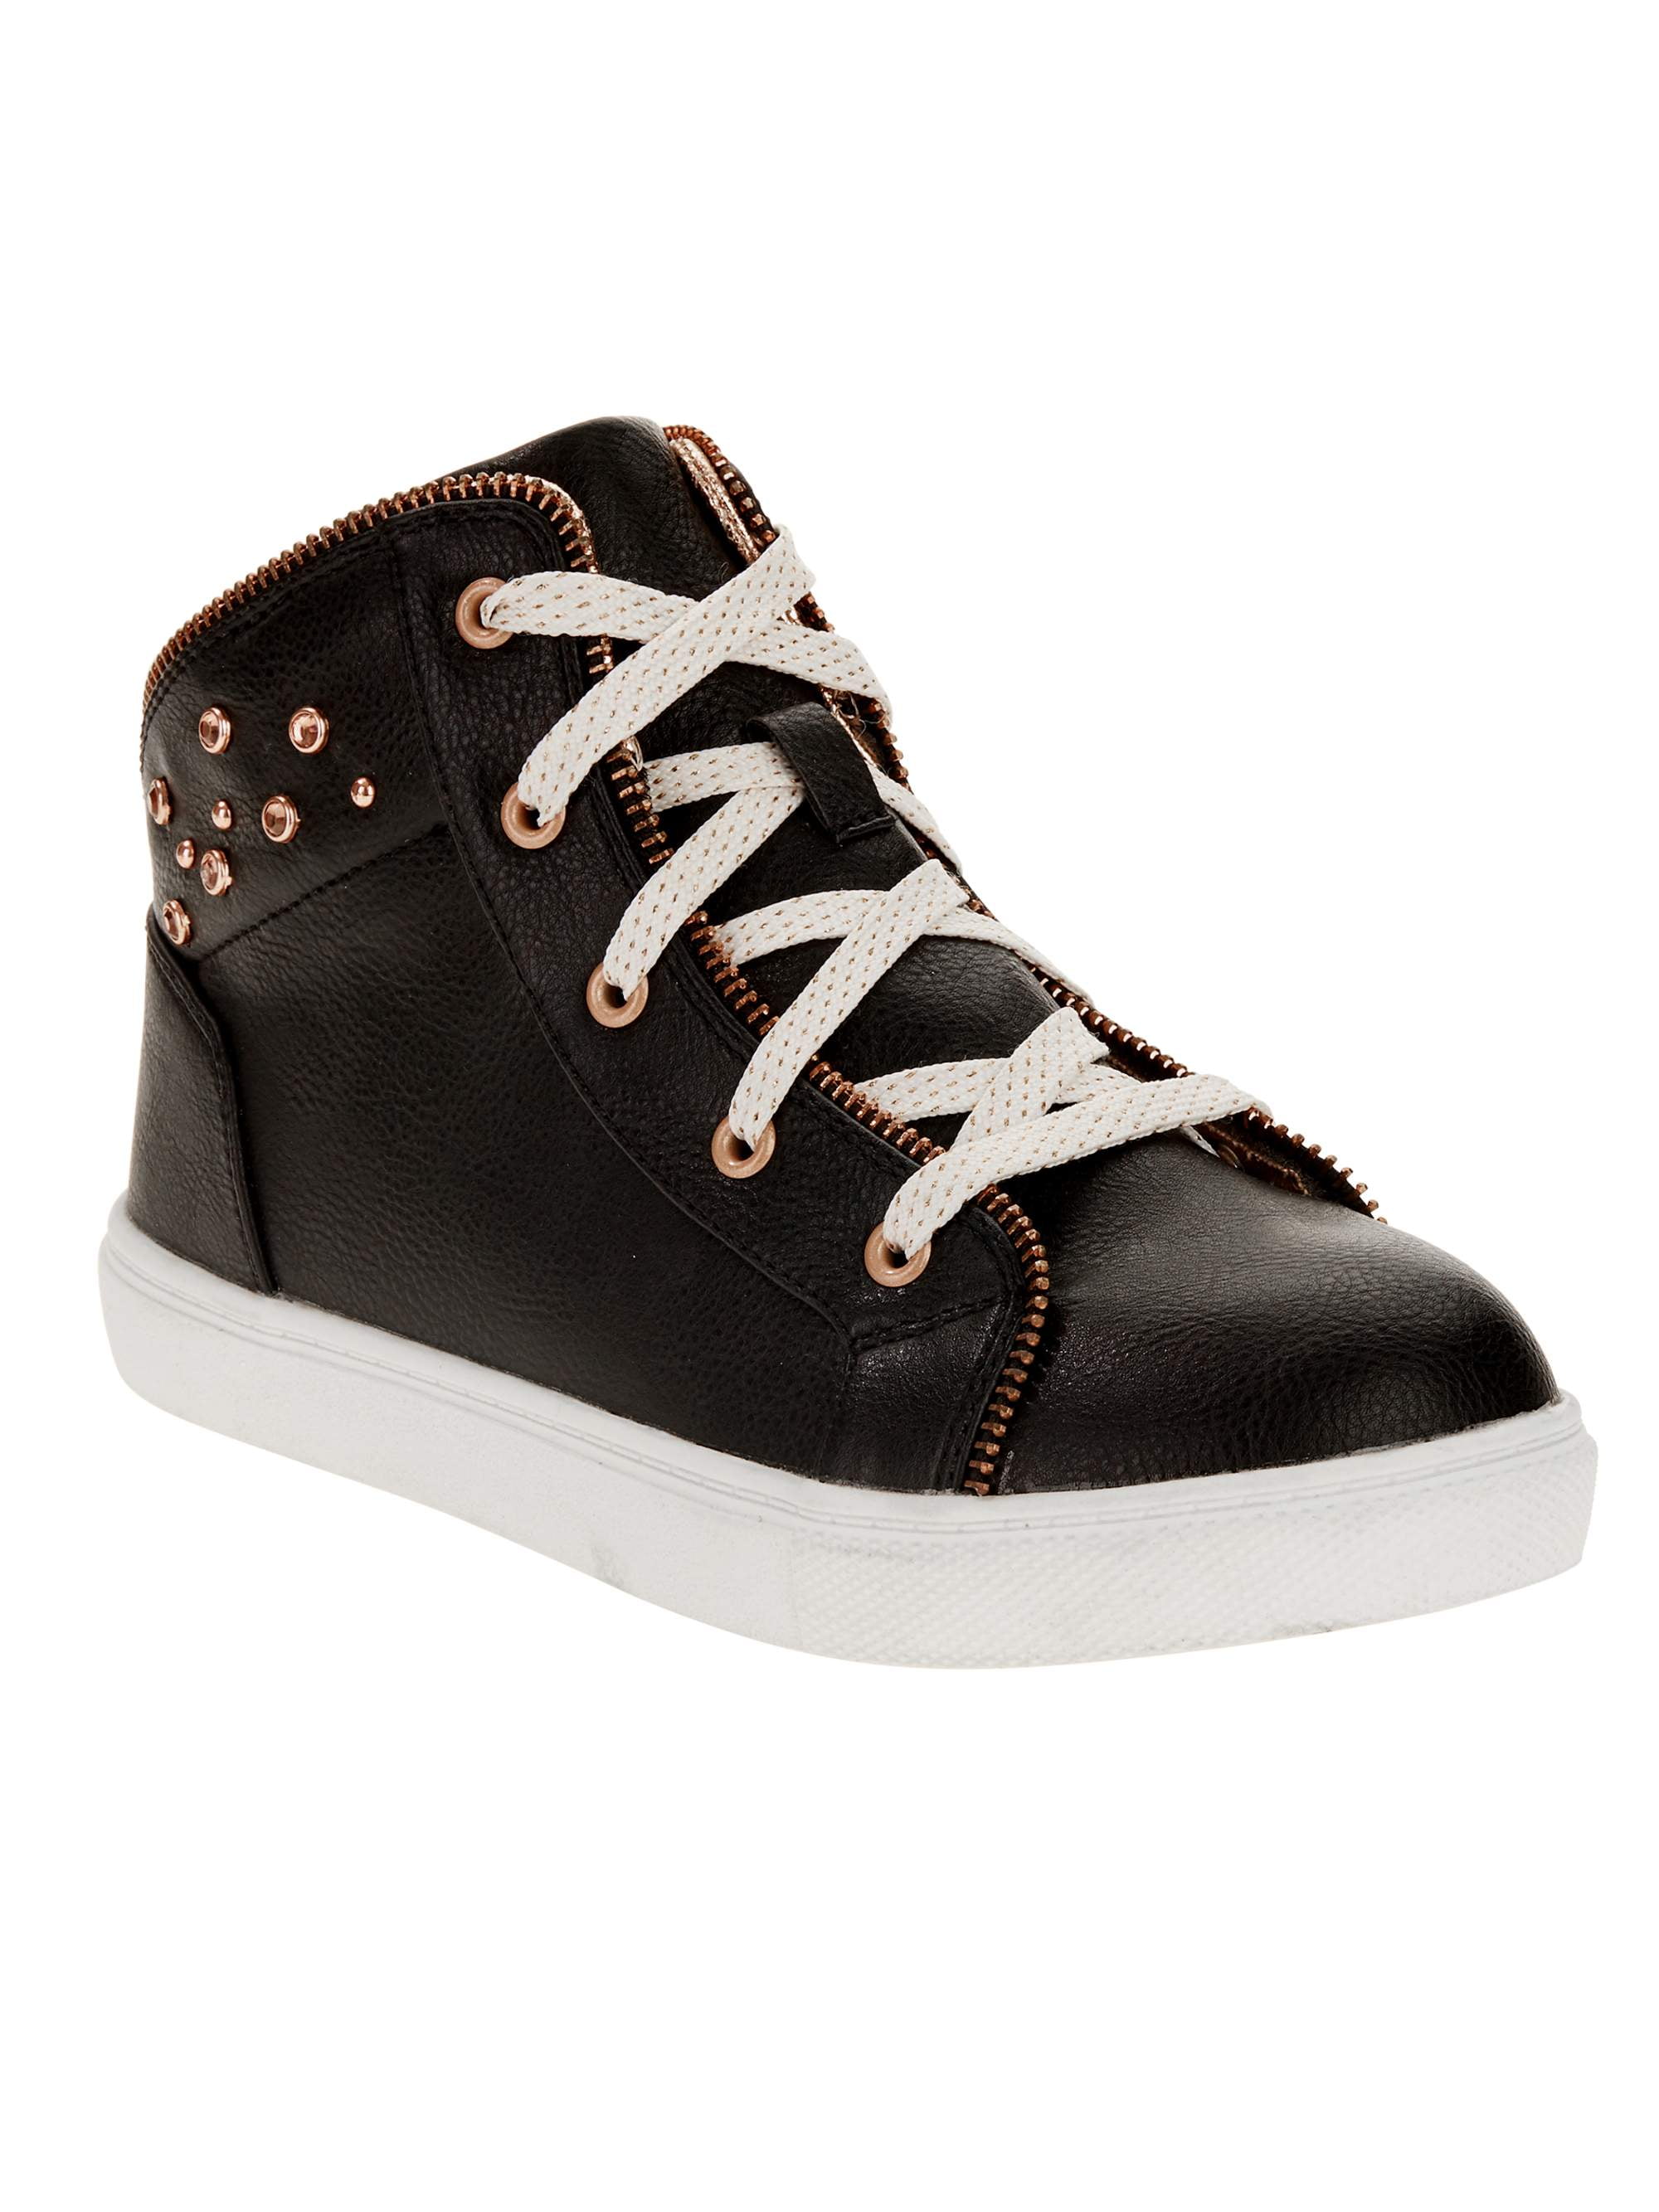 high top sneakers for girls